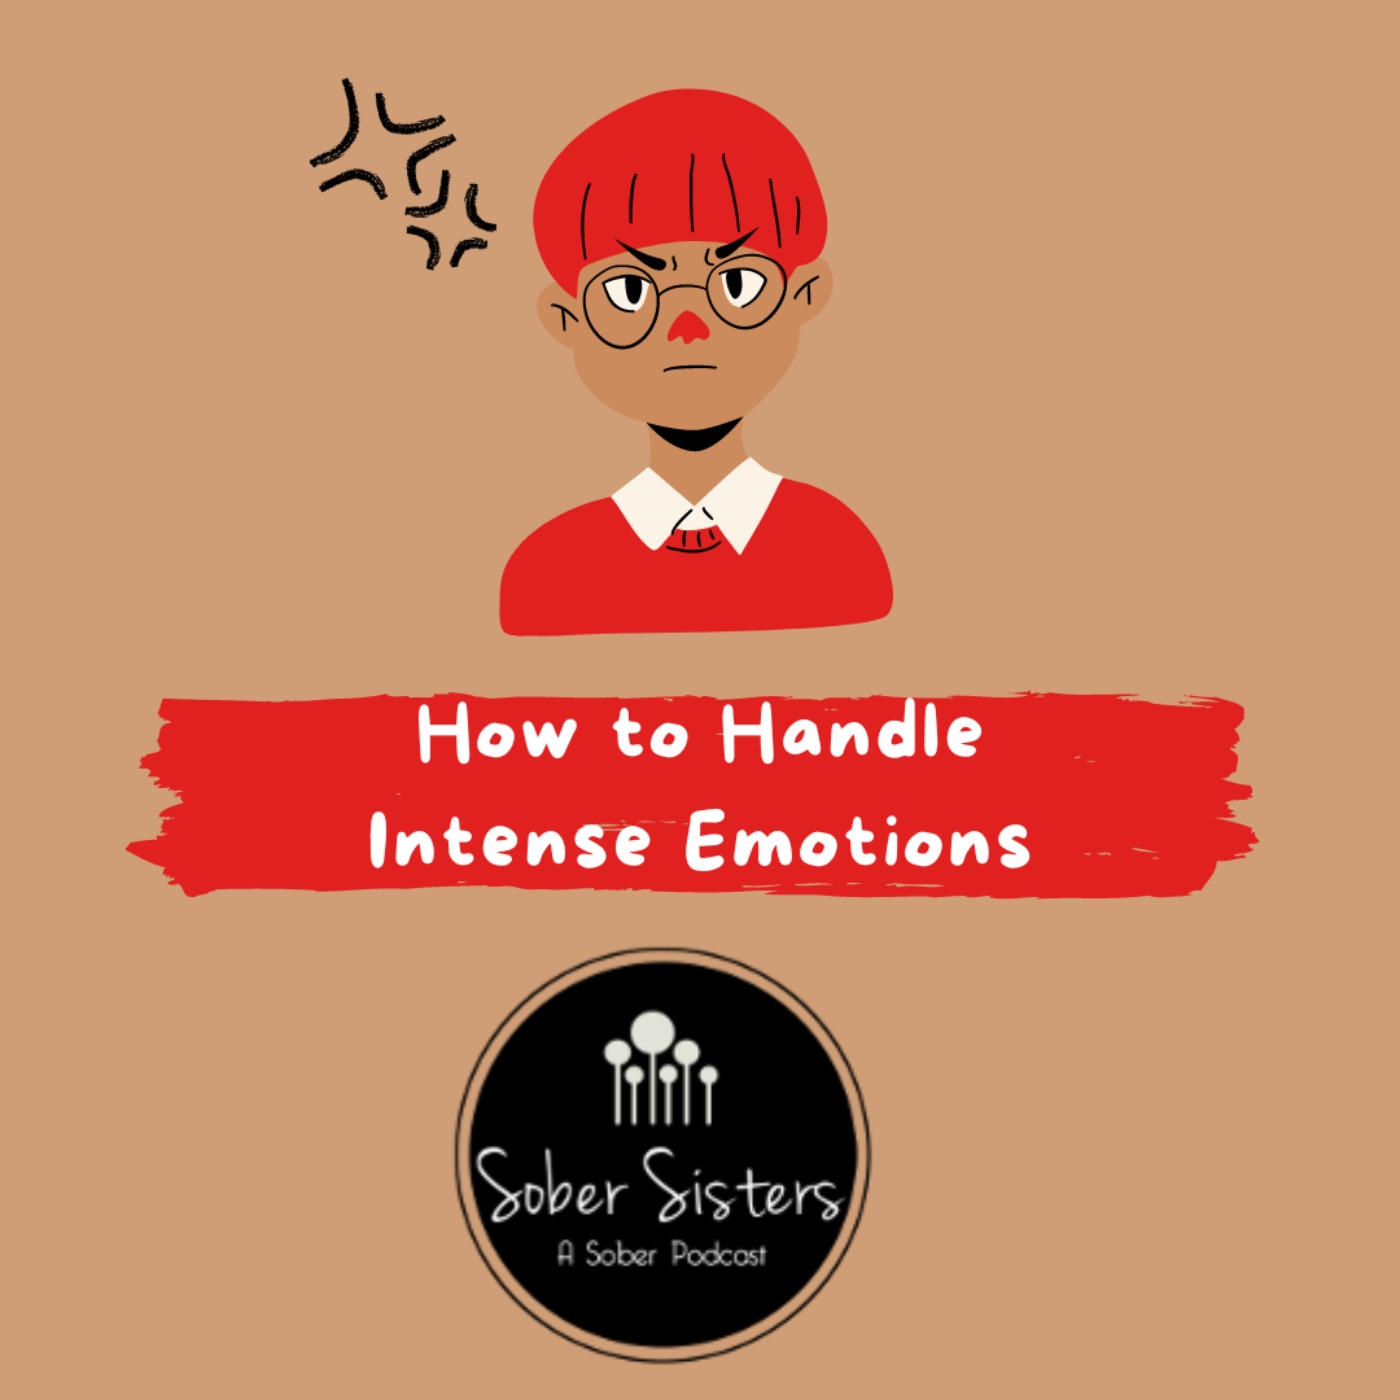 How to Handle Intense Emotions